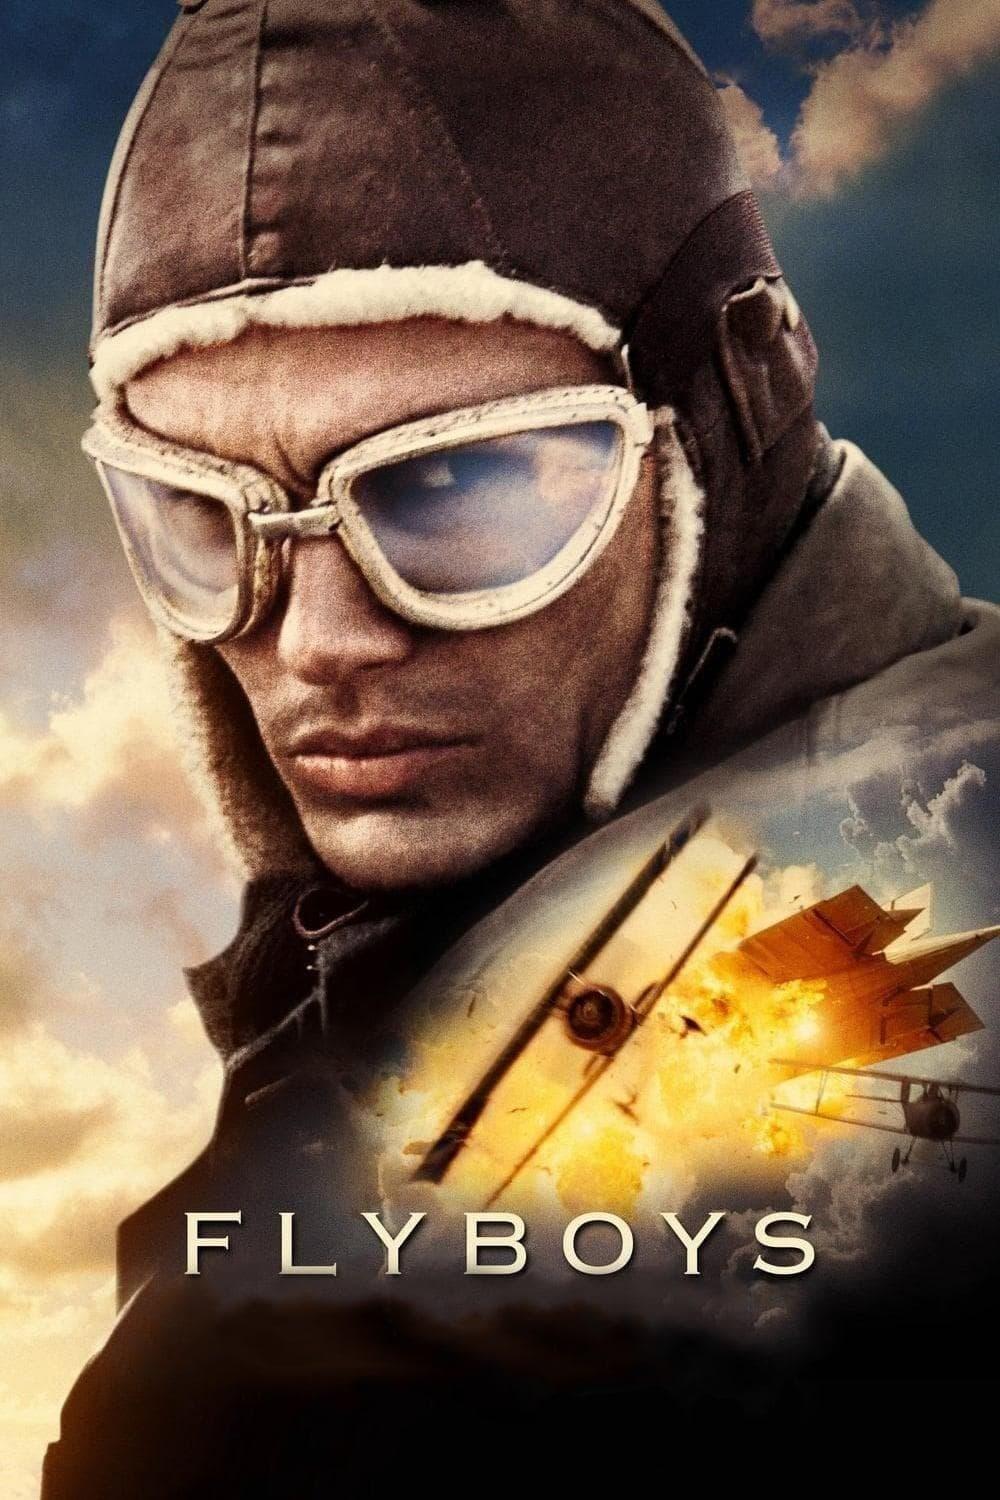 Flyboys poster